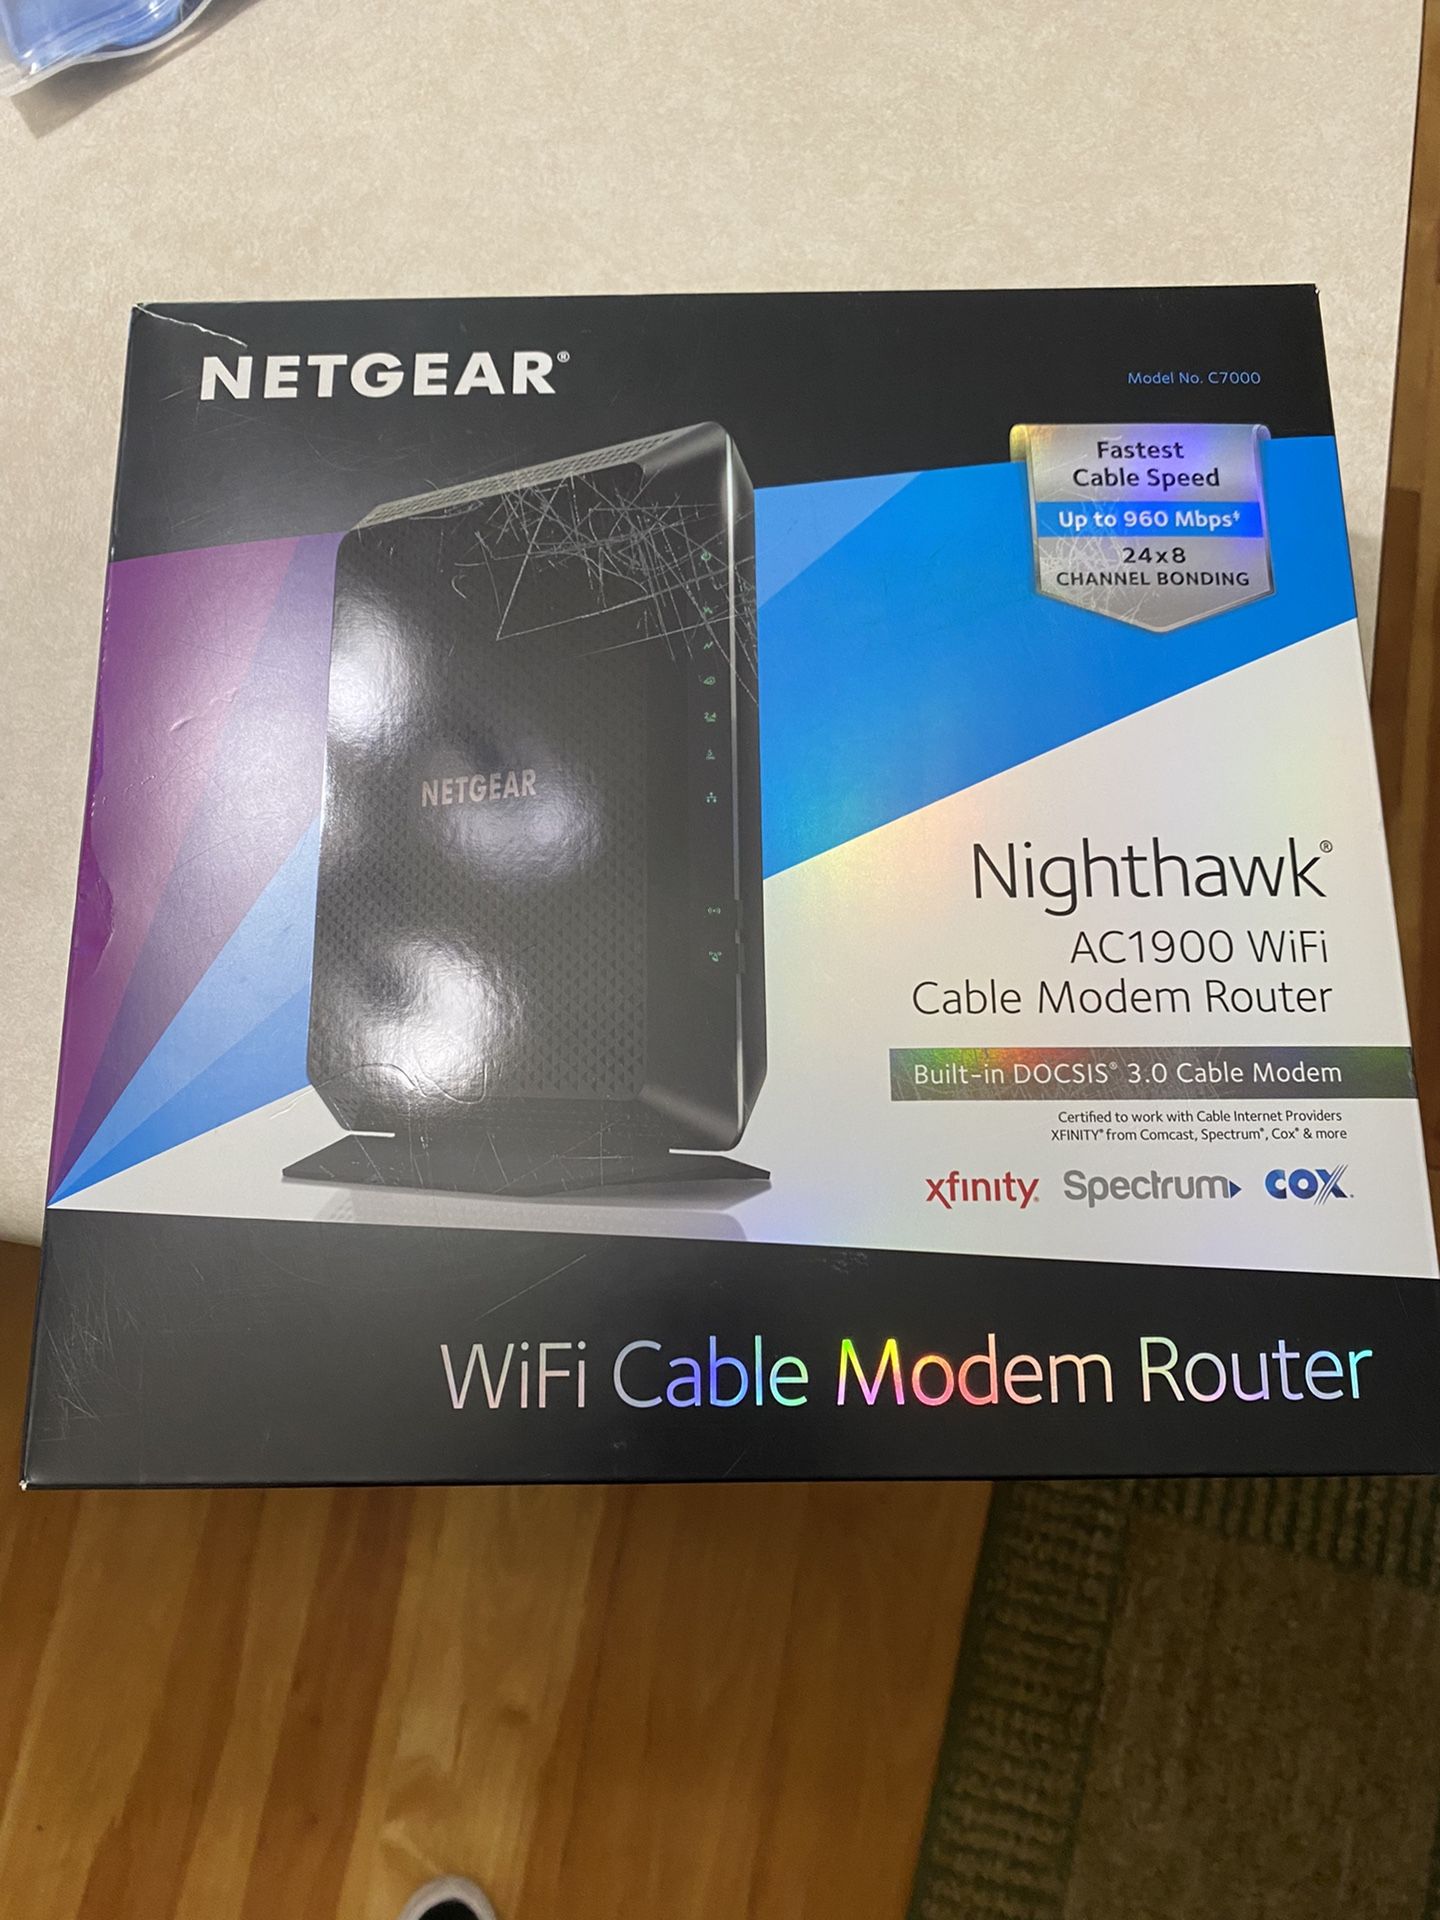 Stop Renting Net gear Nighthawk Model C7000 Cable Modem And Router